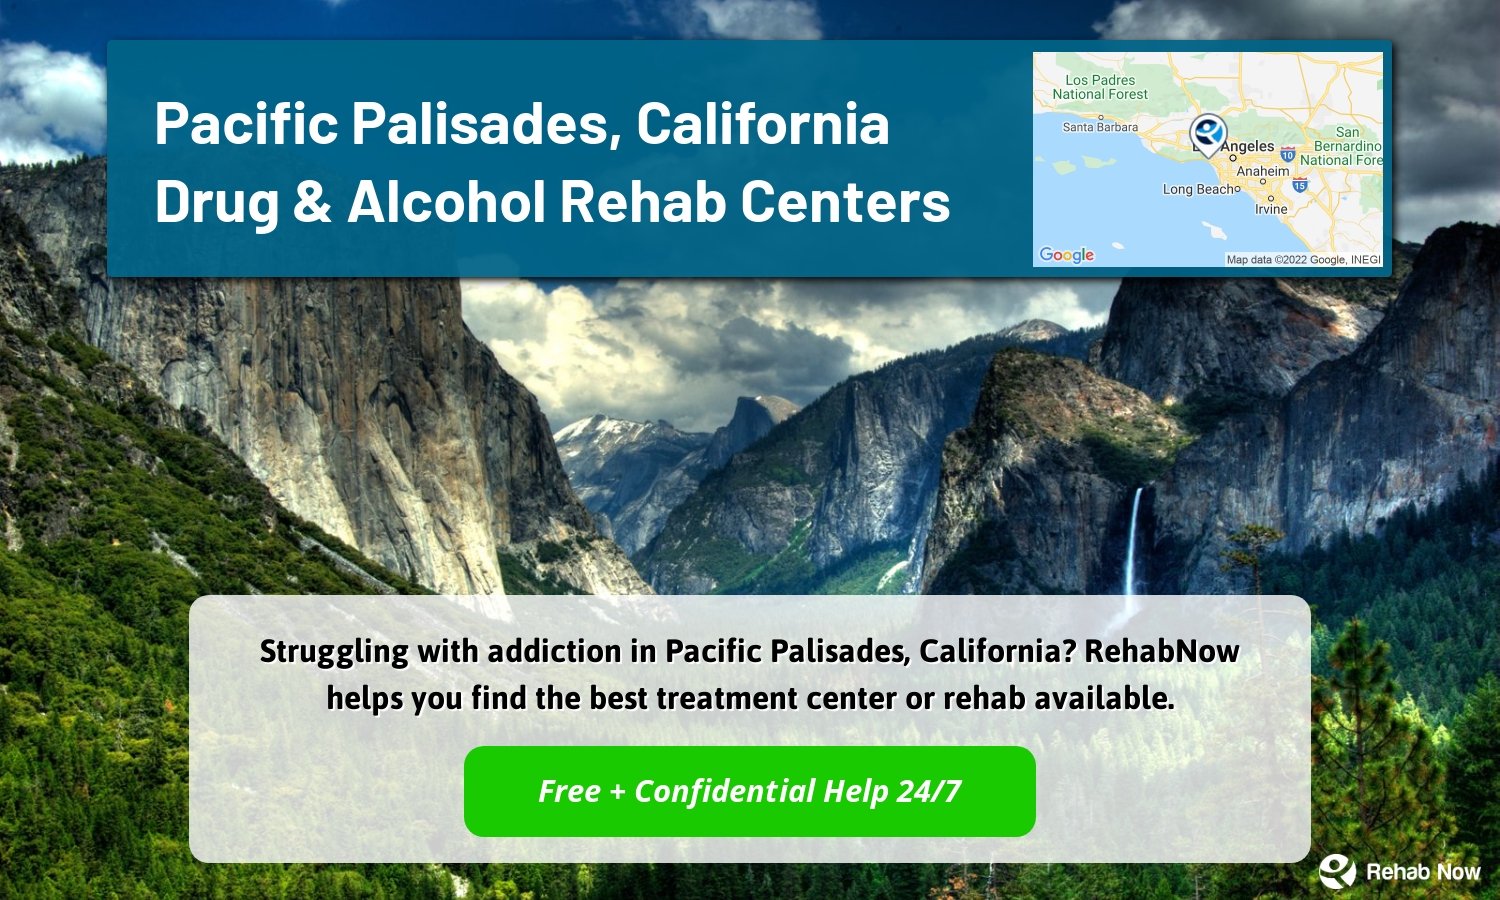 Struggling with addiction in Pacific Palisades, California? RehabNow helps you find the best treatment center or rehab available.